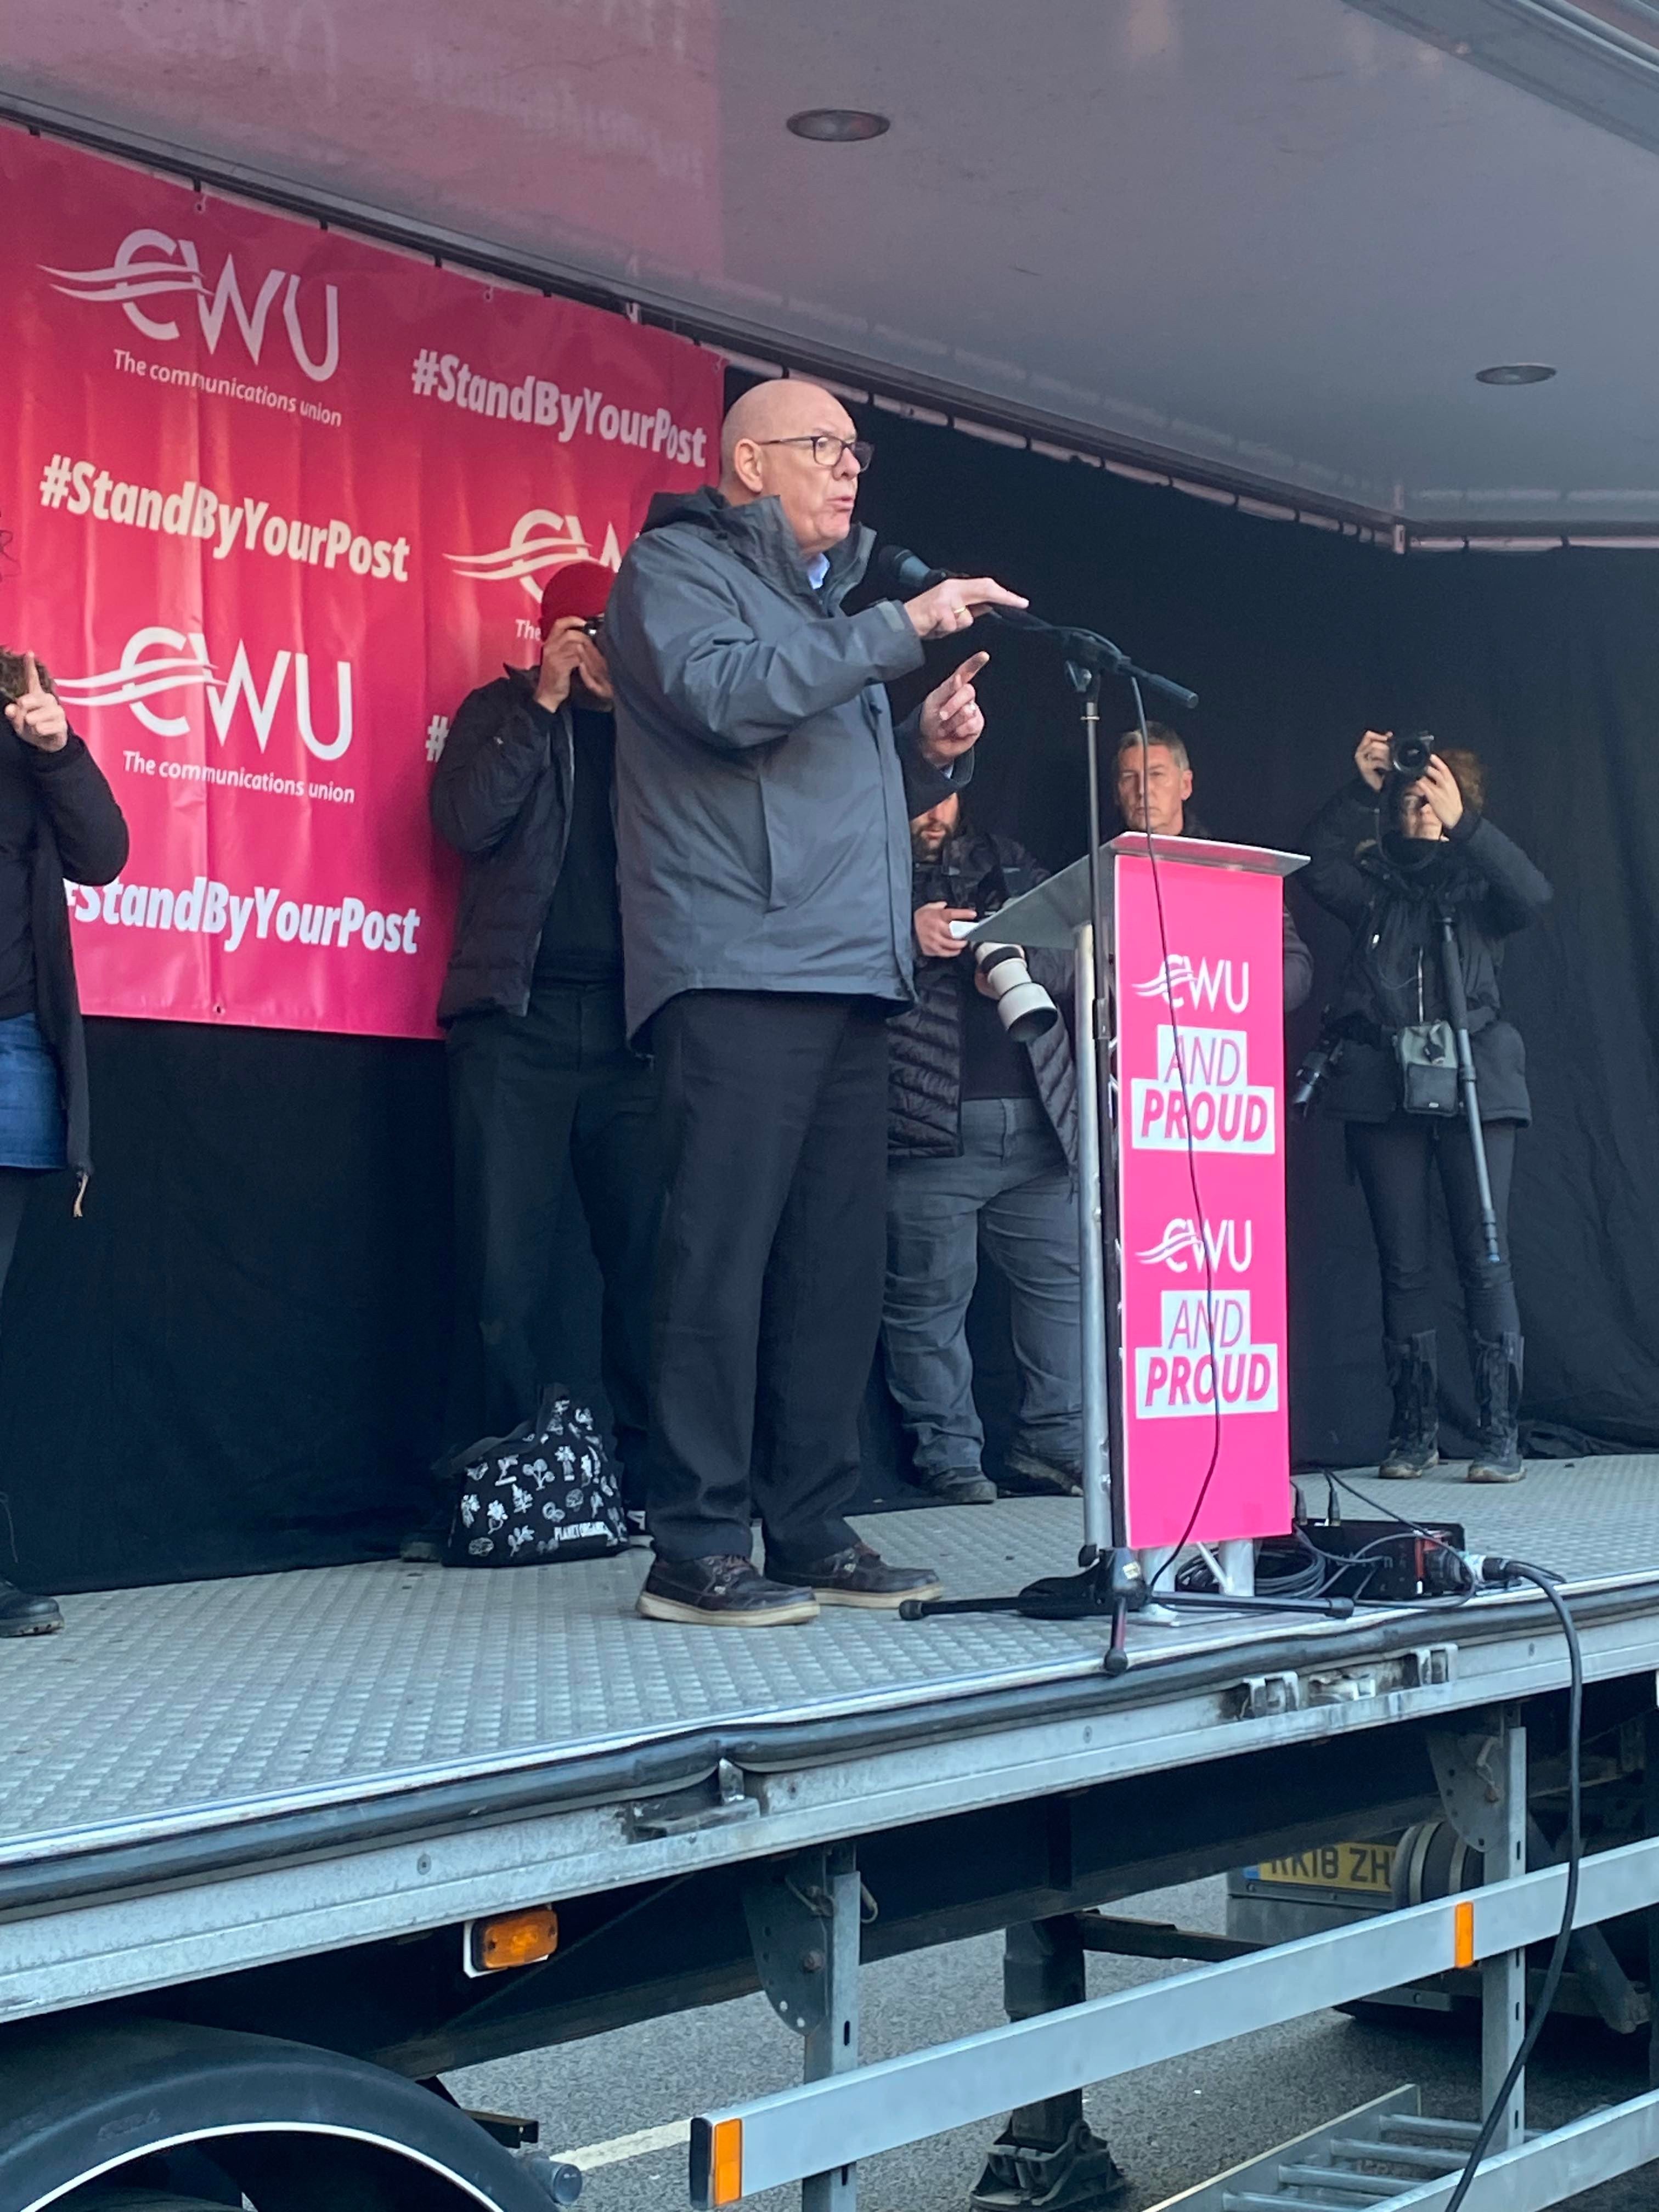 General Secretary of the Communication Workers Union Dave Ward addresses striking workers on stage at Parliament Square rally on 9 December.